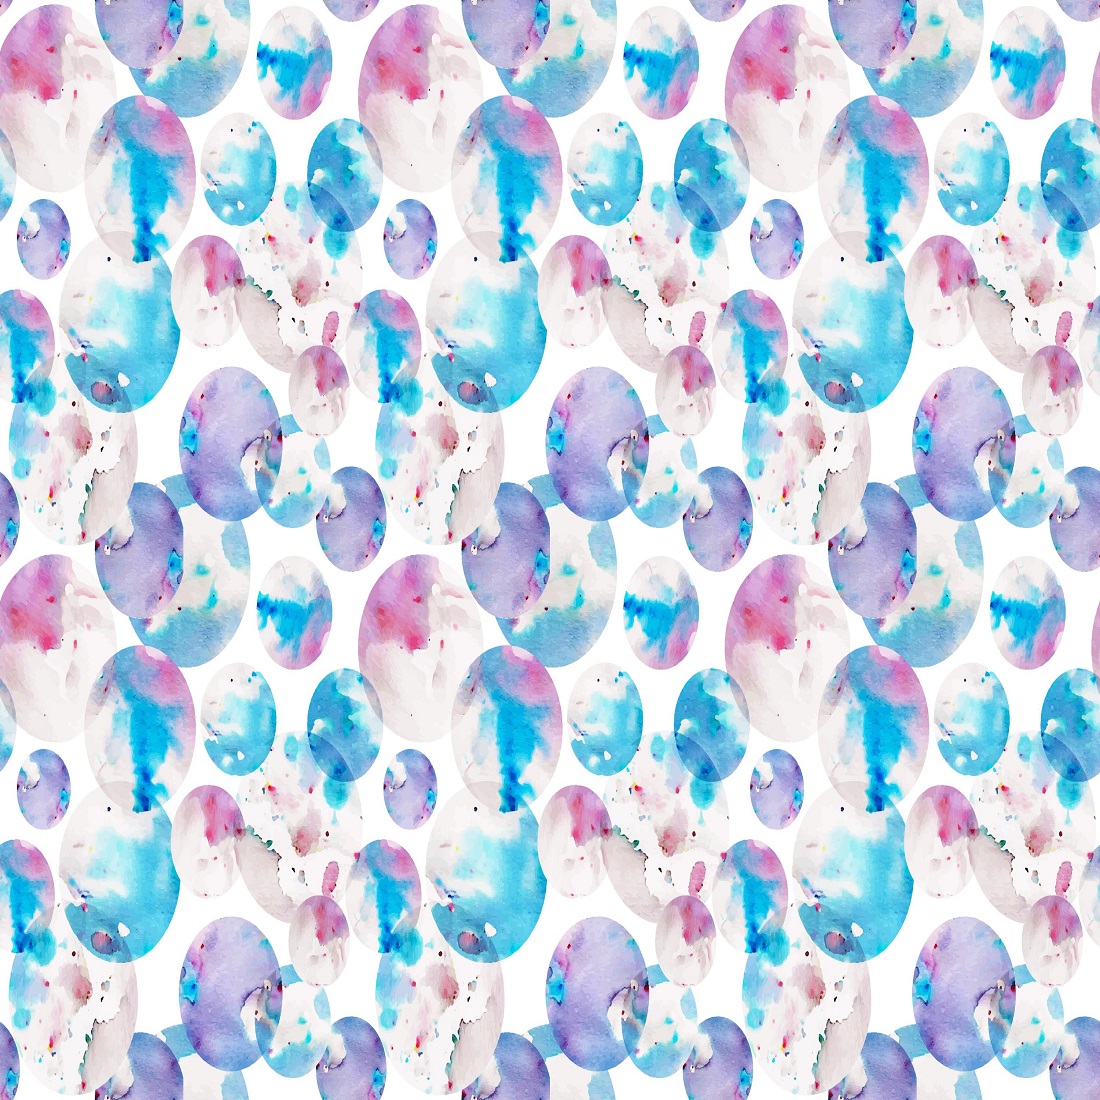 Watercolor dotty pattern preview image.